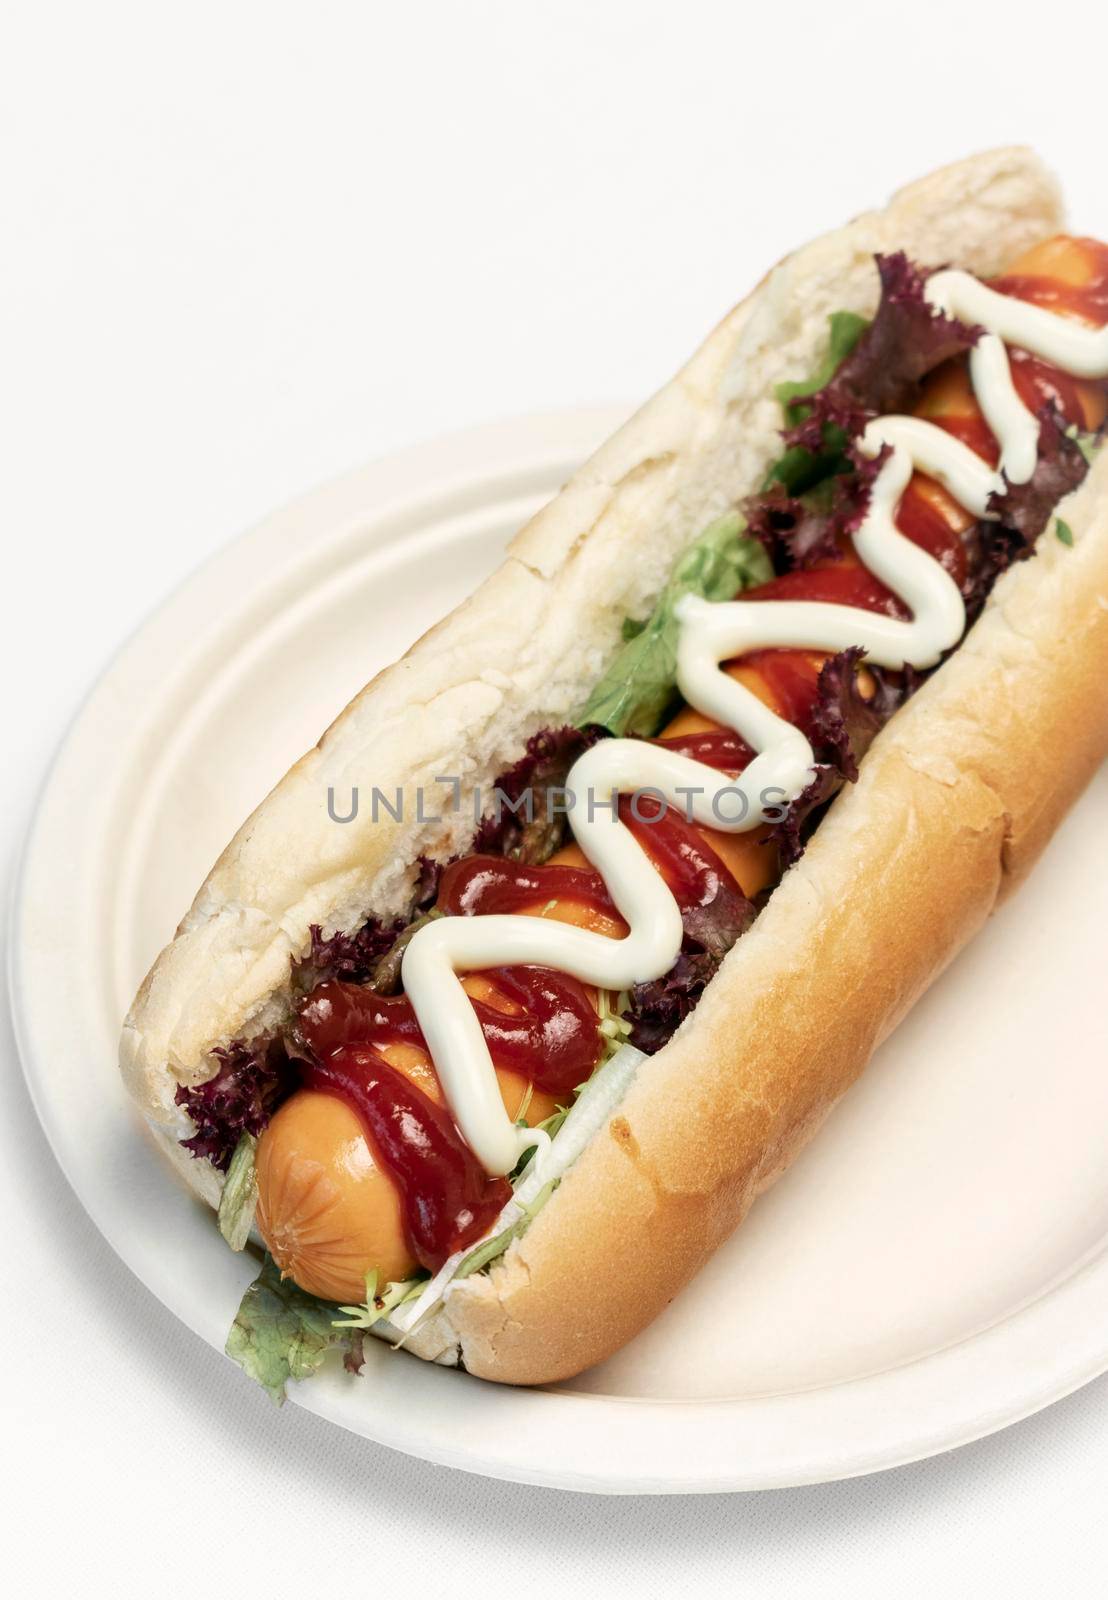 classic hot dog with frankfurter sausage and sauces on white studio background